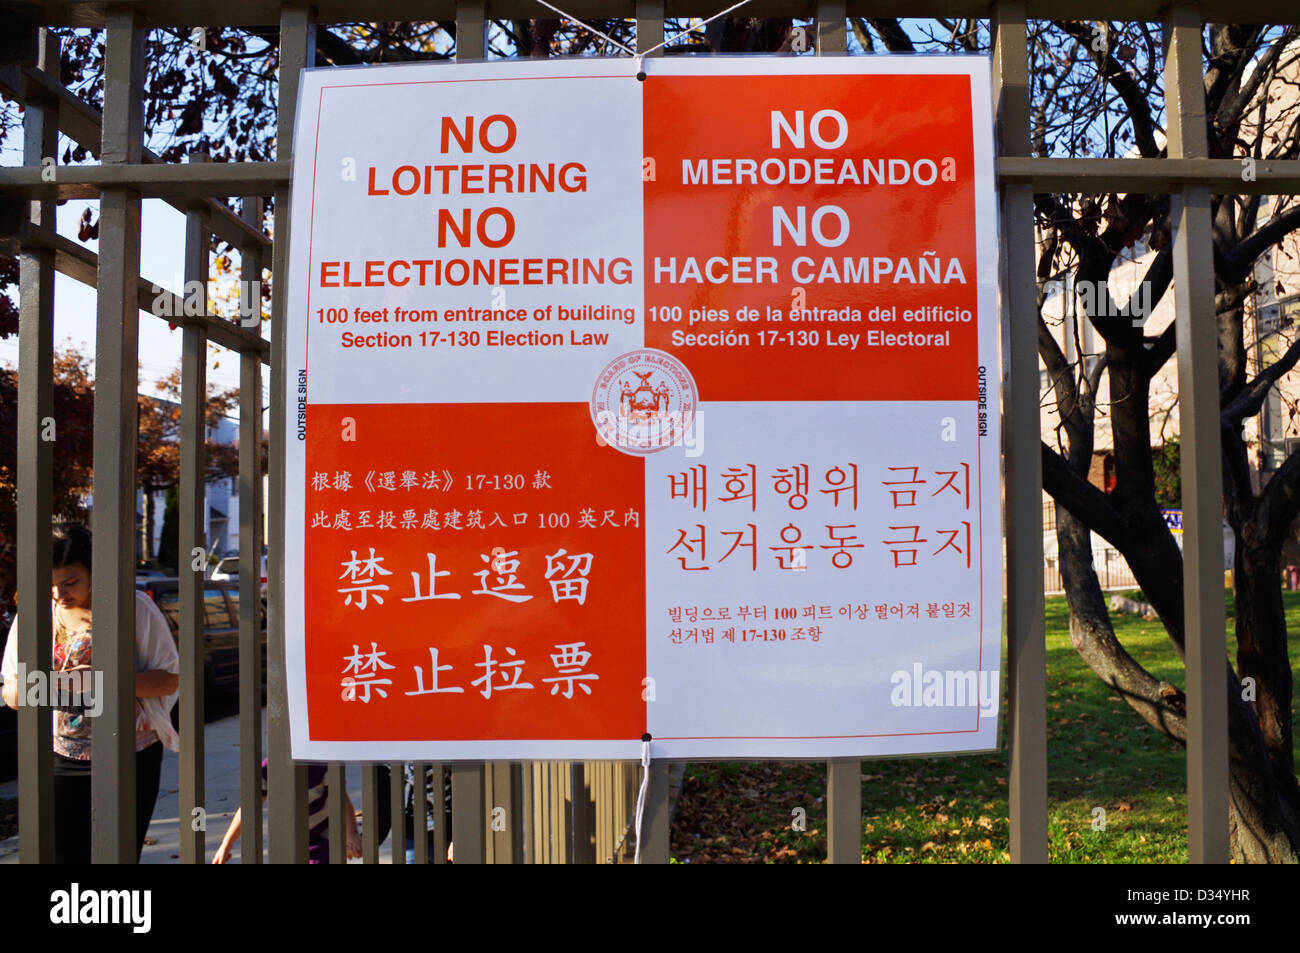 Multi-language posted sign warning No loitering and No electioneering within 100 feet of entrance of voting location in USA Stock Photo